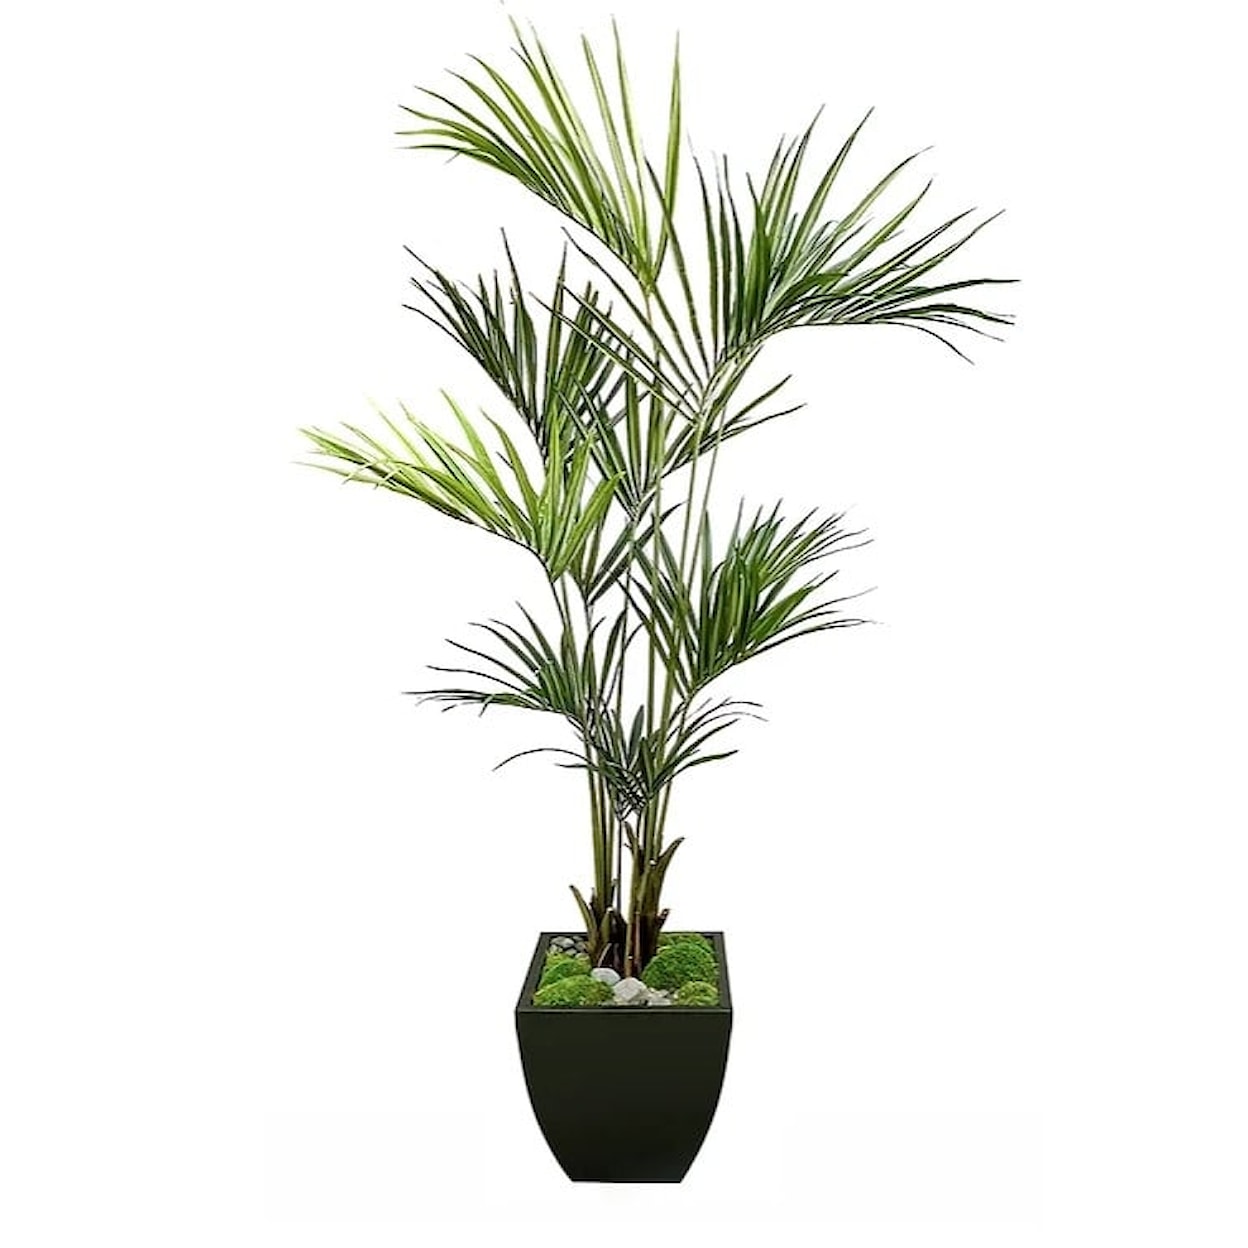 The Ivy Guild Trees & Plants 7' Kentia Palm in Zinc 